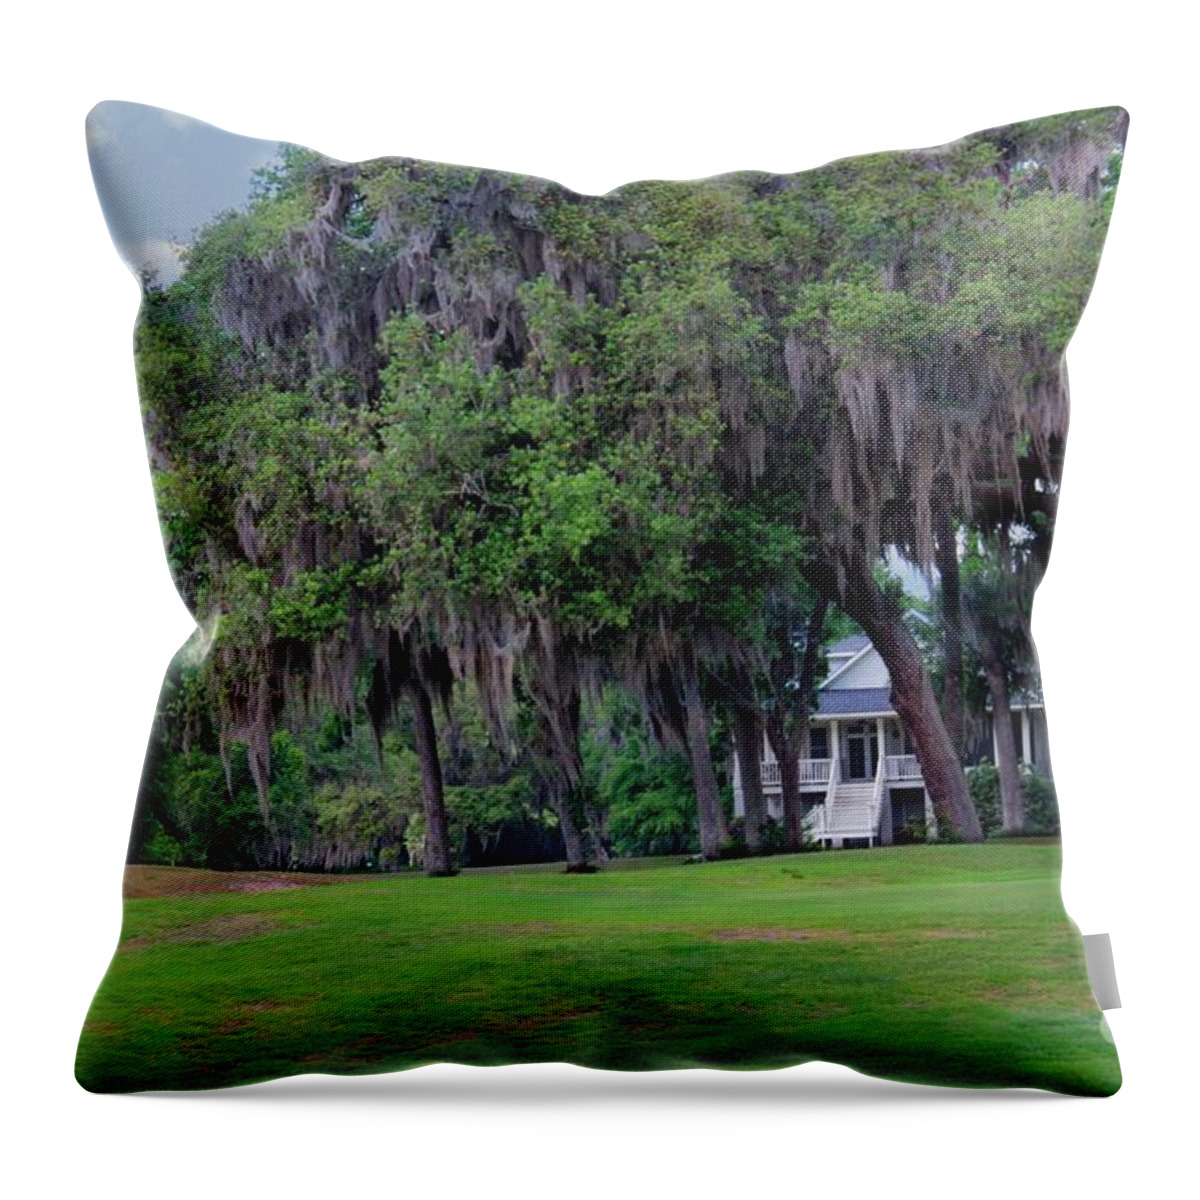 Landscape Throw Pillow featuring the photograph Southern Living Style by Ella Kaye Dickey